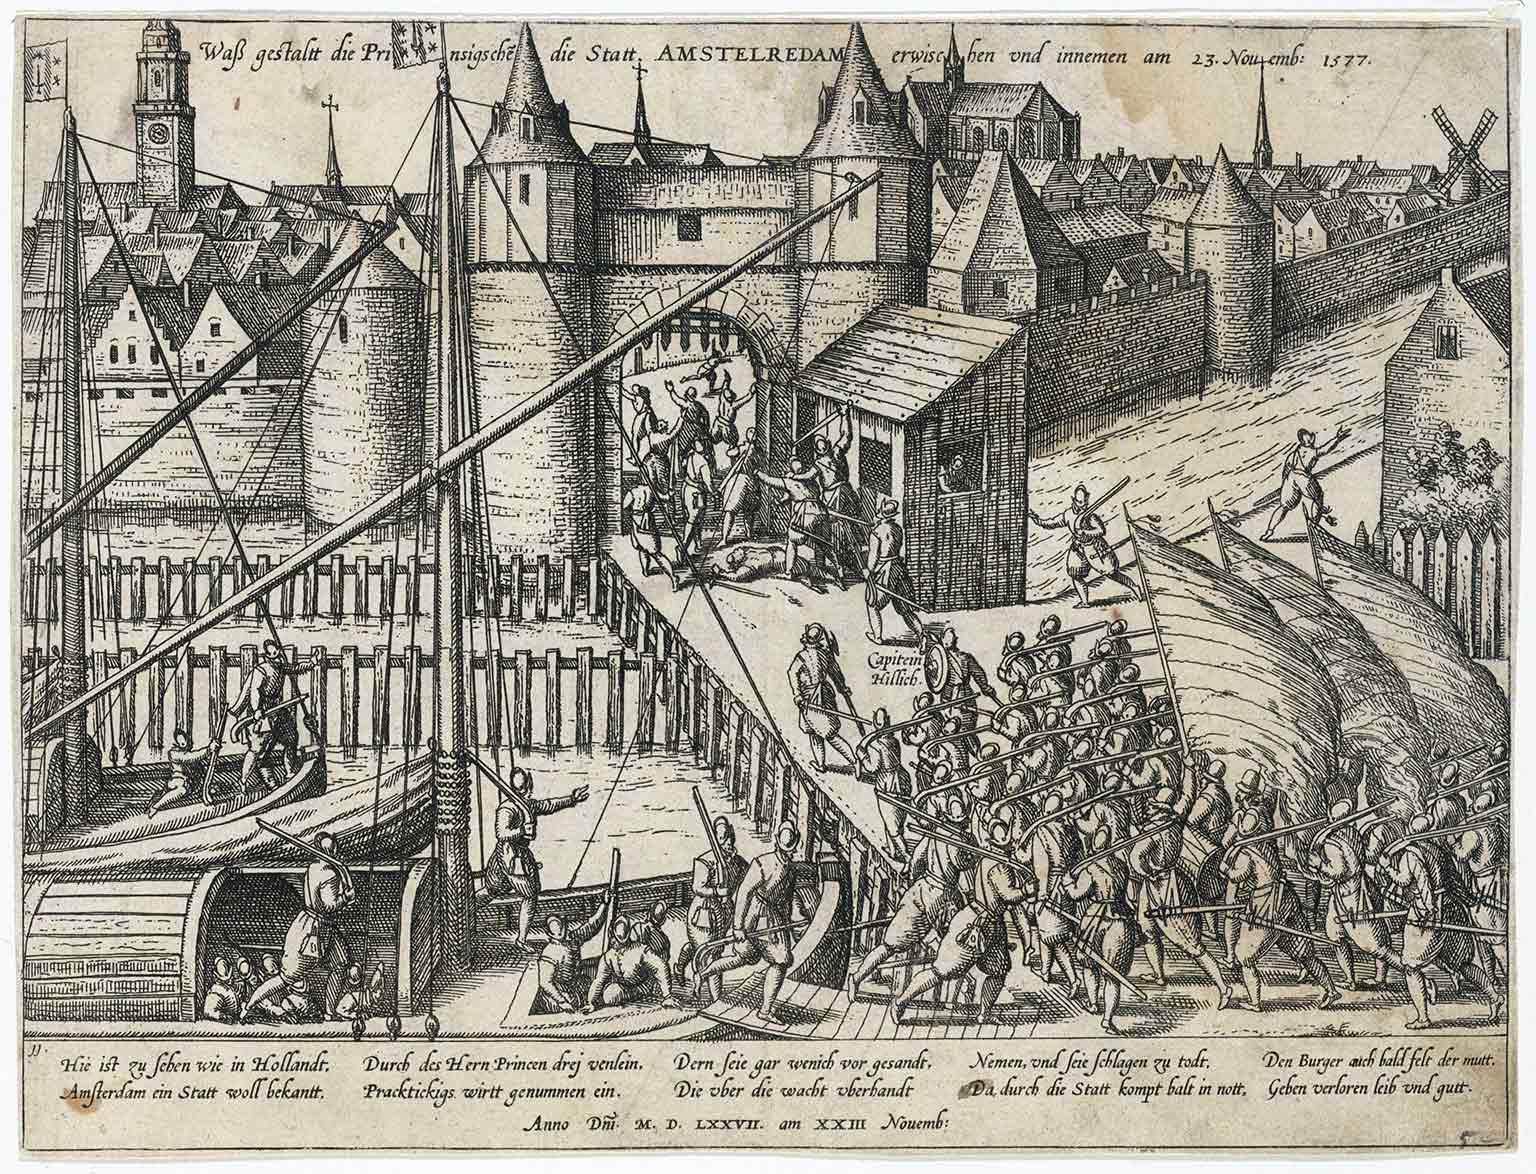 Attempt by the Beggars to overtake Amsterdam in 1577 at the 2nd Haarlemmerpoort